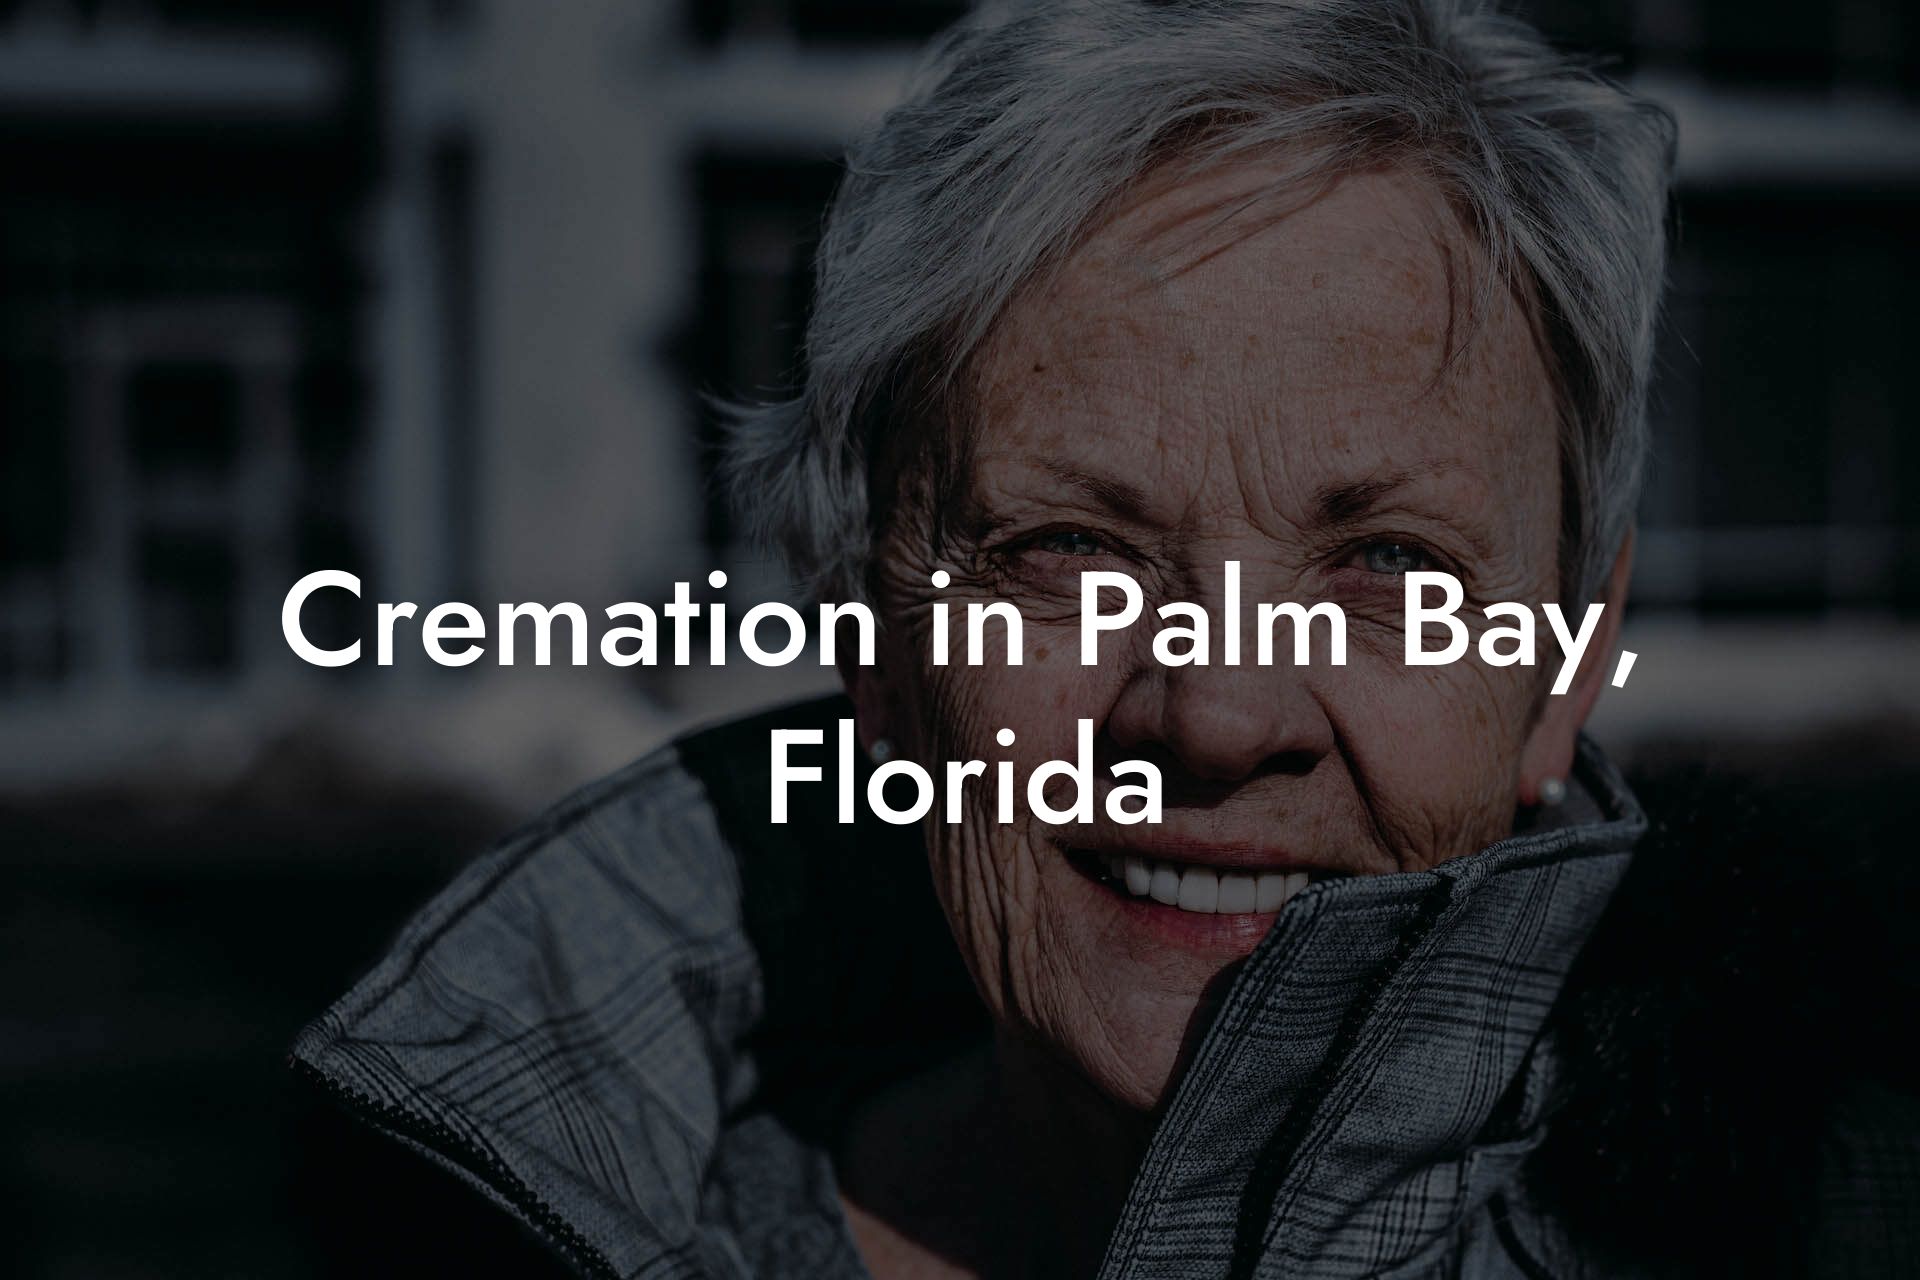 Cremation in Palm Bay, Florida